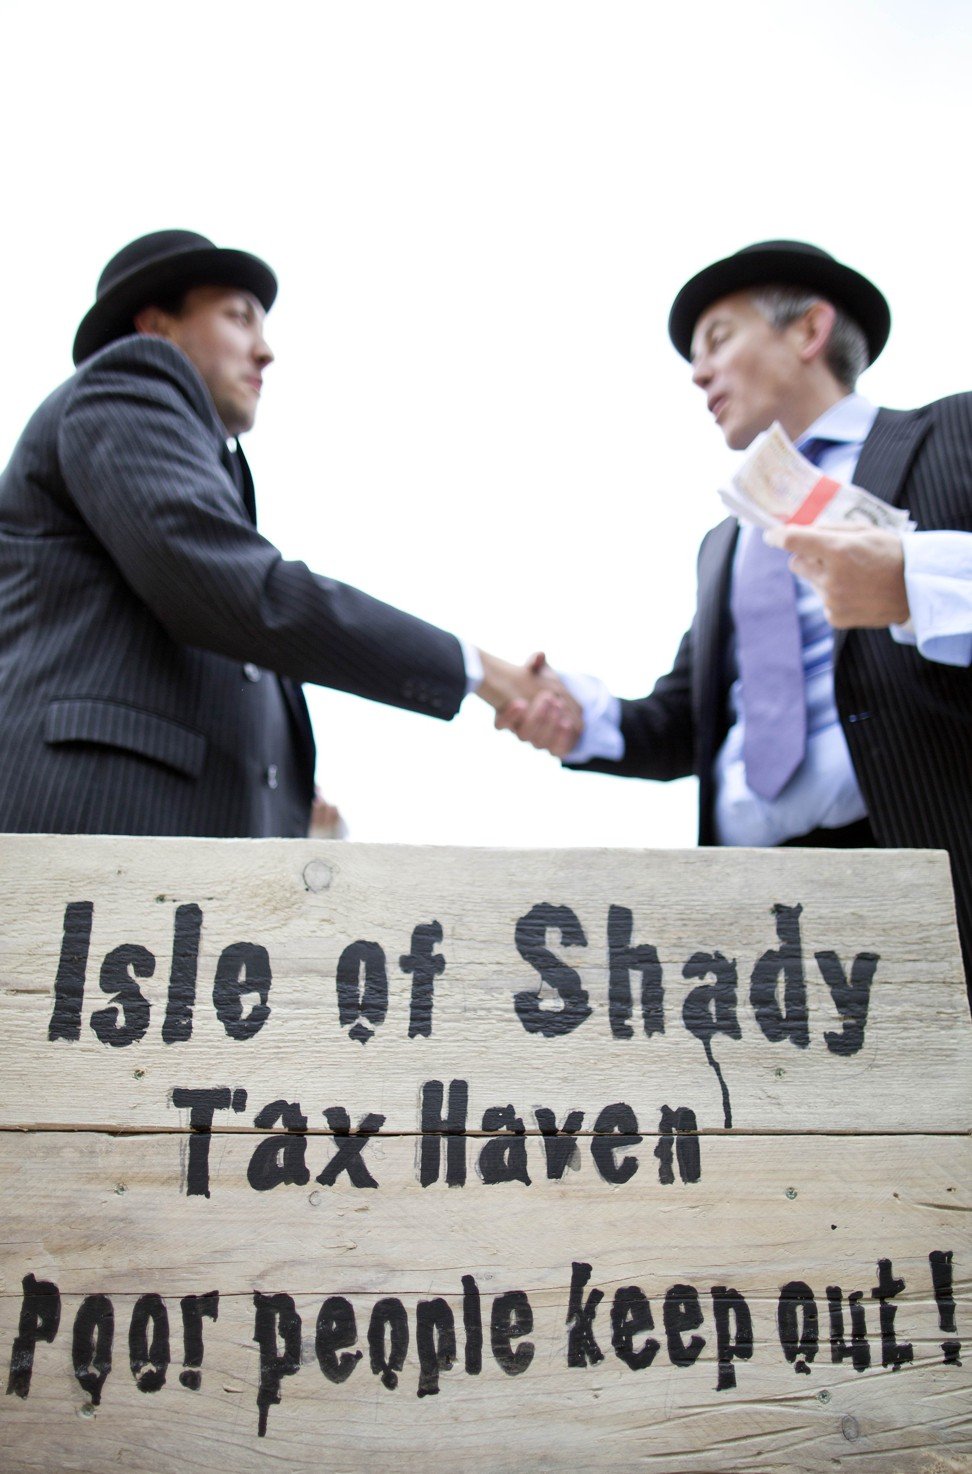 Protesters dressed up as shady businessmen calling for a crackdown on tax havens, in London in 2013. Photo: AFP